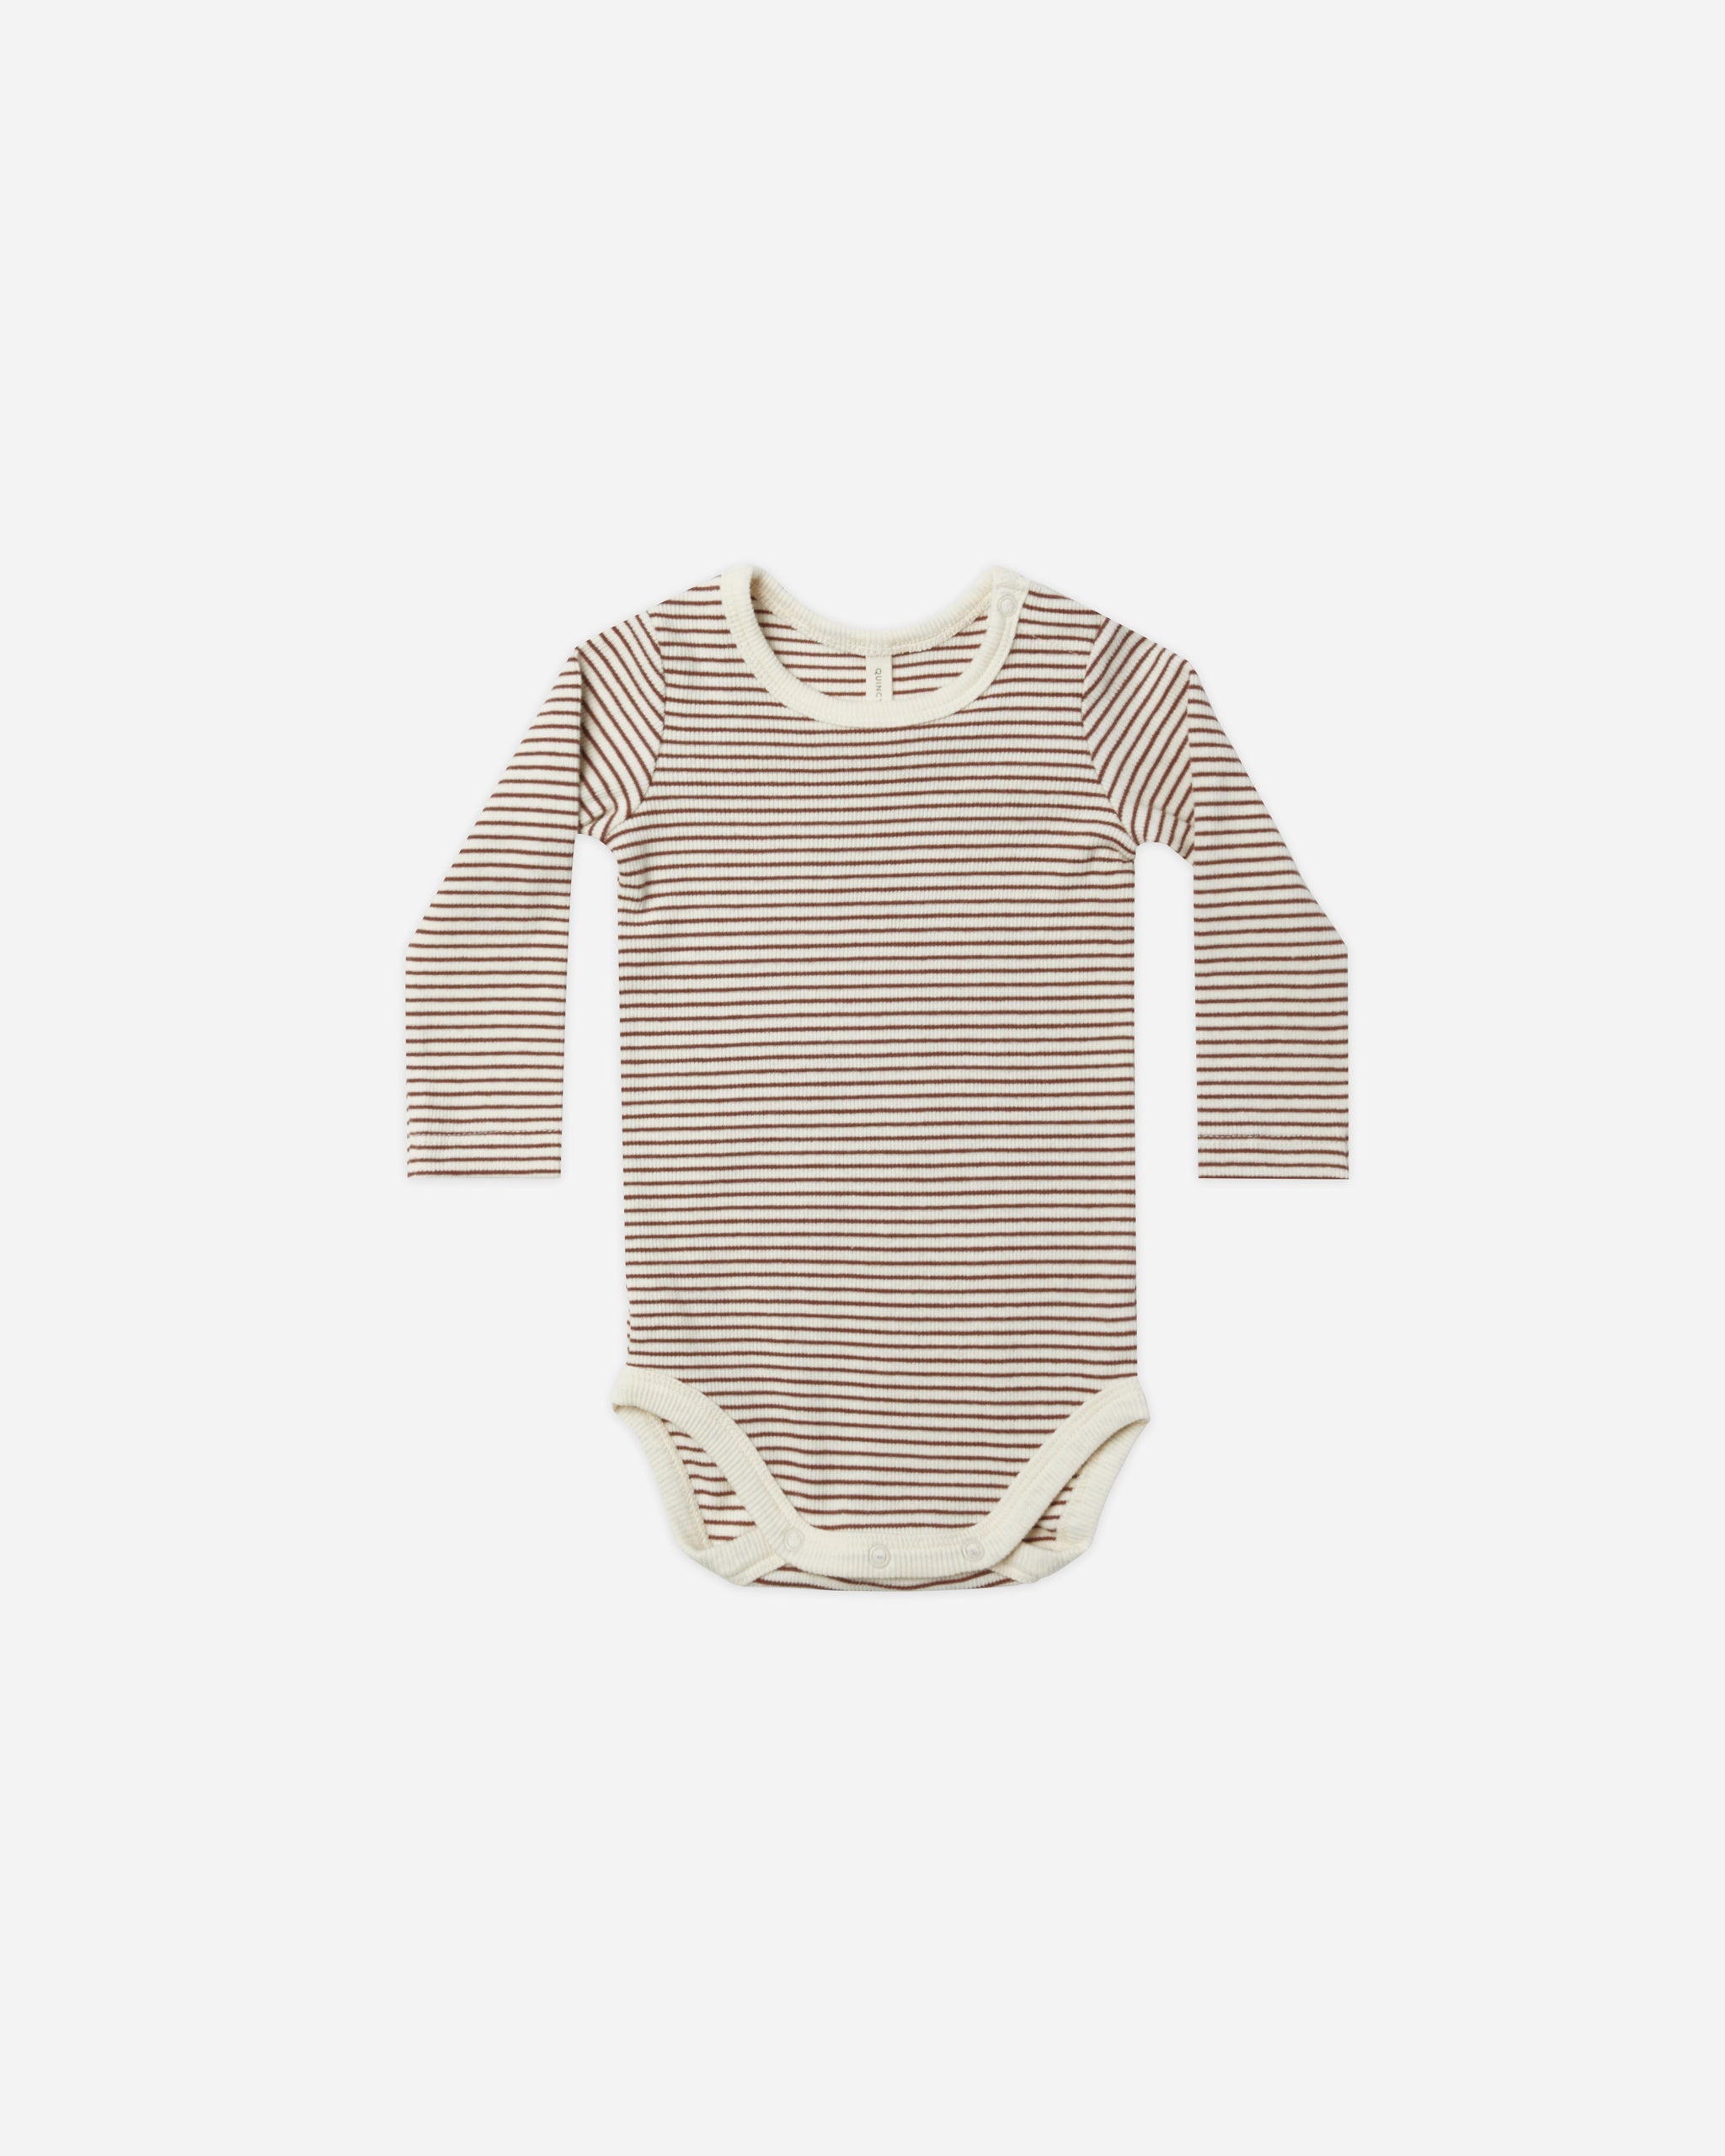 Ribbed Long Sleeve Bodysuit || Plum Stripe - Rylee + Cru | Kids Clothes | Trendy Baby Clothes | Modern Infant Outfits |